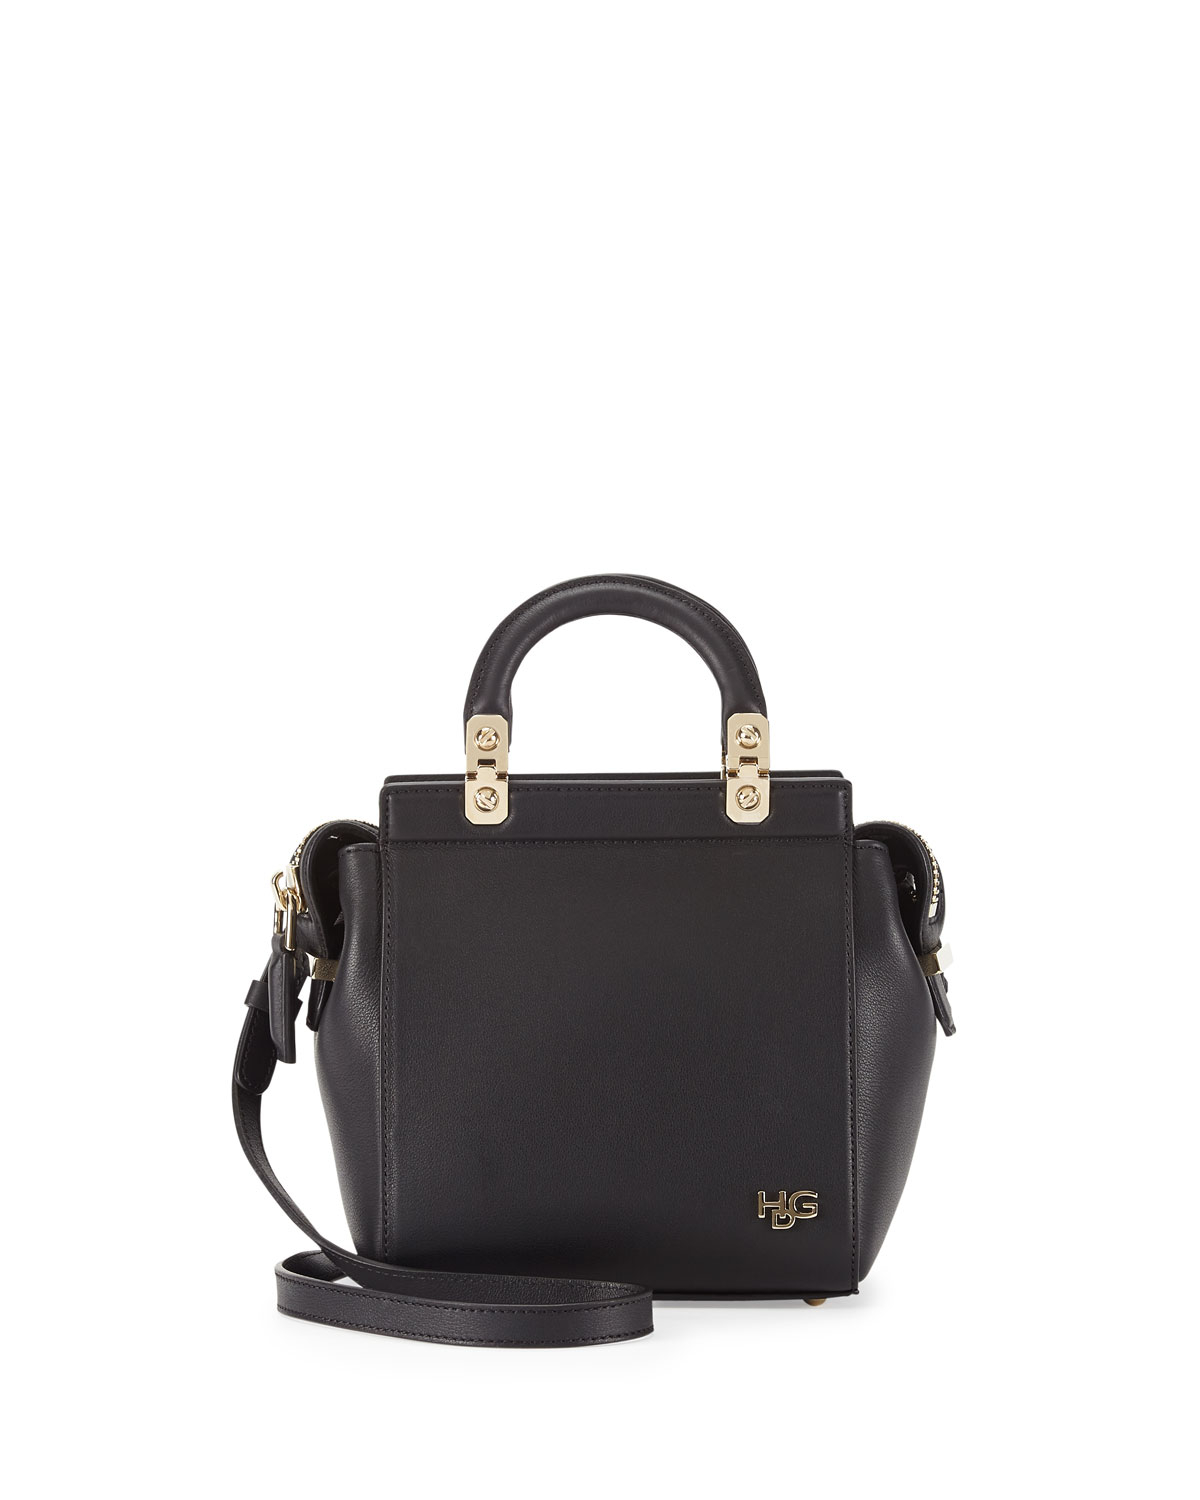 Givenchy Hdg Top-Handle Mini Leather Crossbody Bag in Black